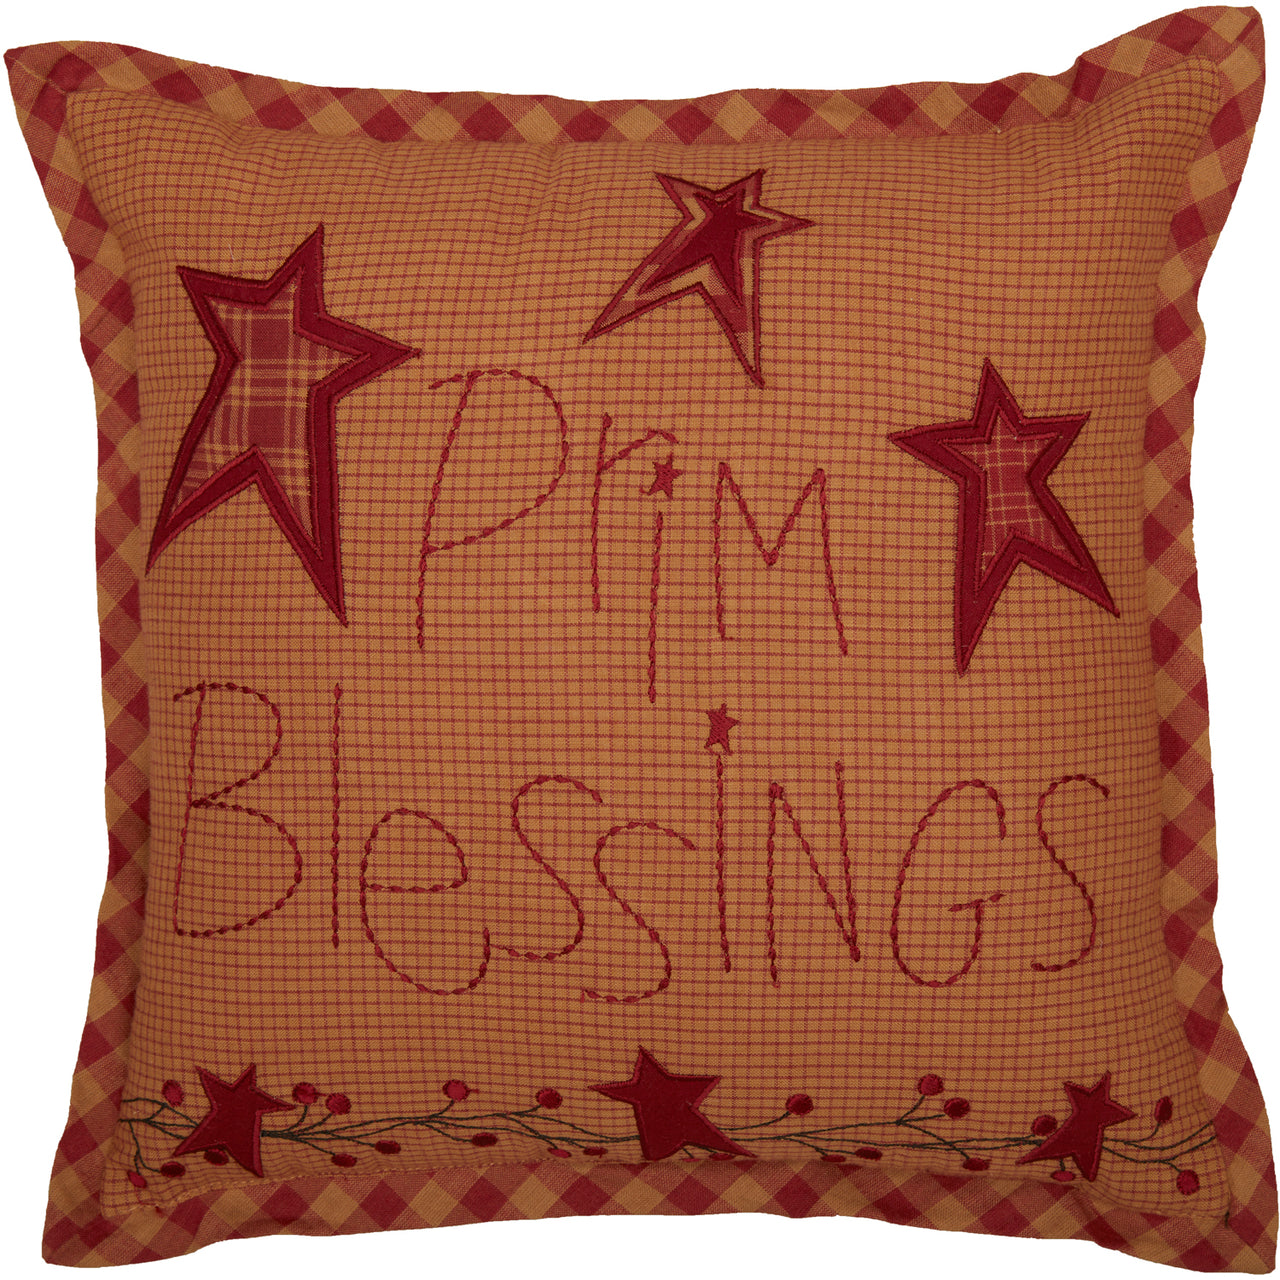 Ninepatch Star Prim Blessings Pillow 12x12 VHC Brands